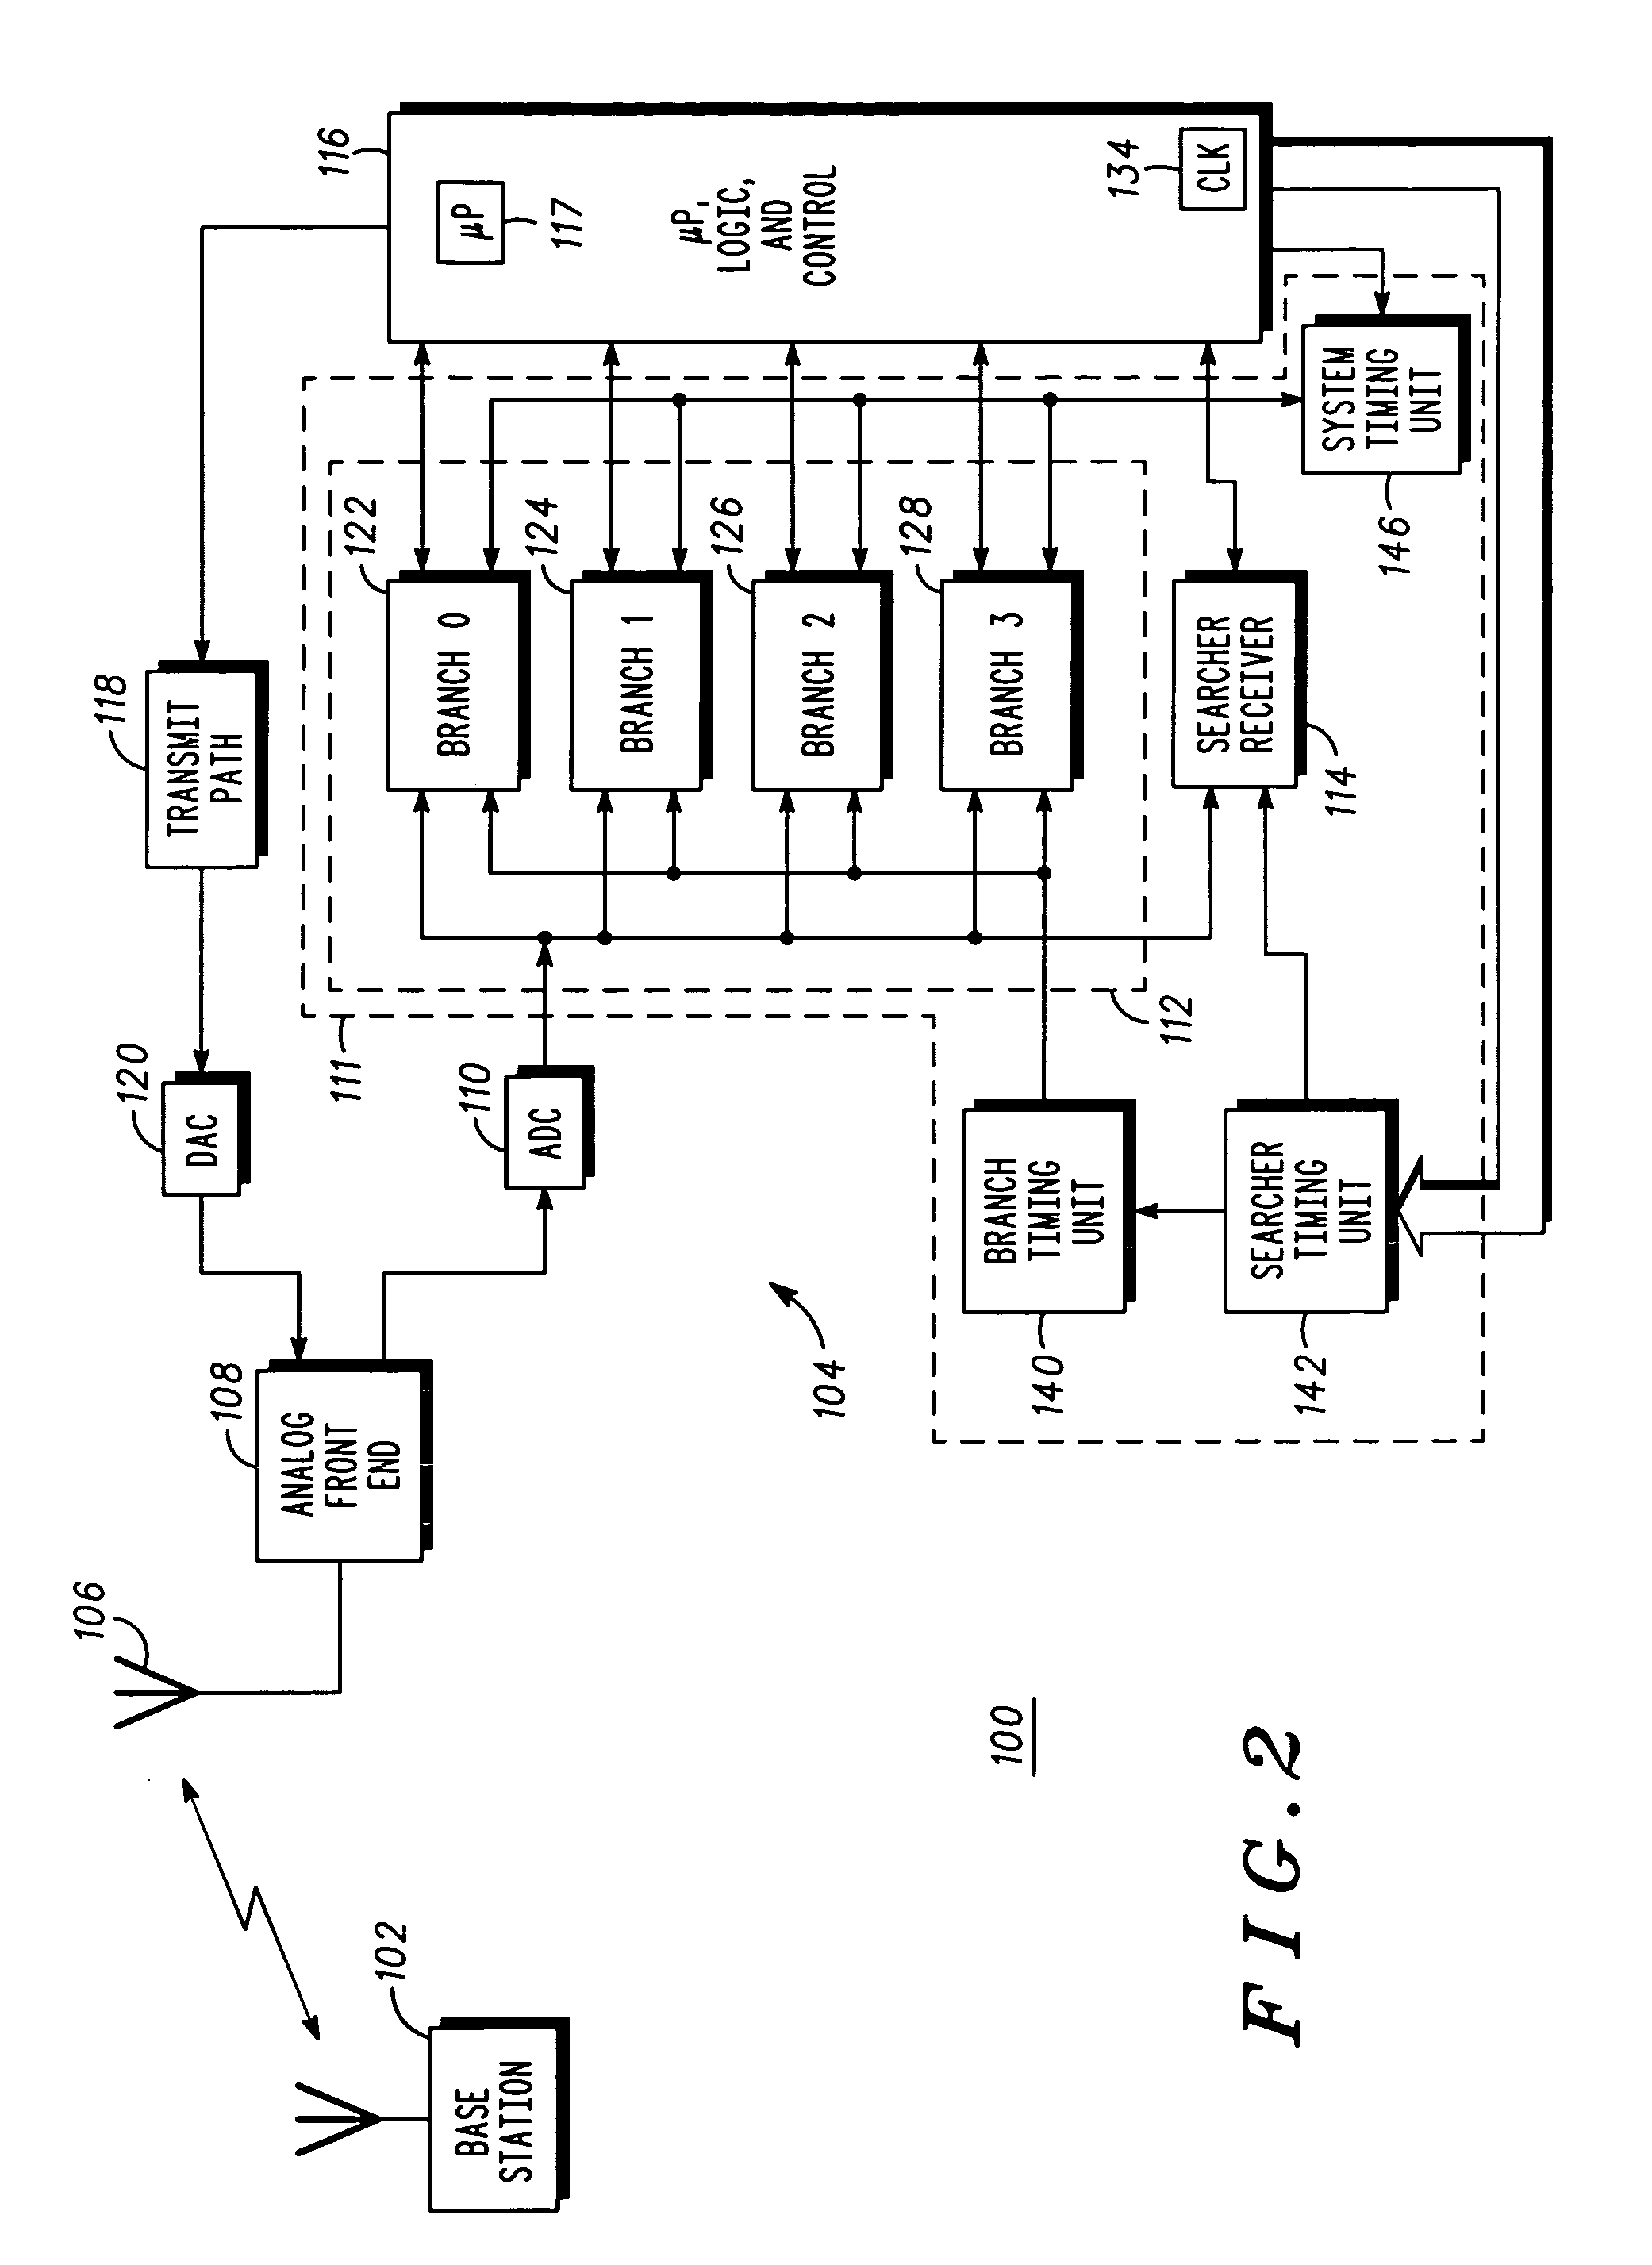 Method of and apparatus for activating a spread-spectrum radiotelephone